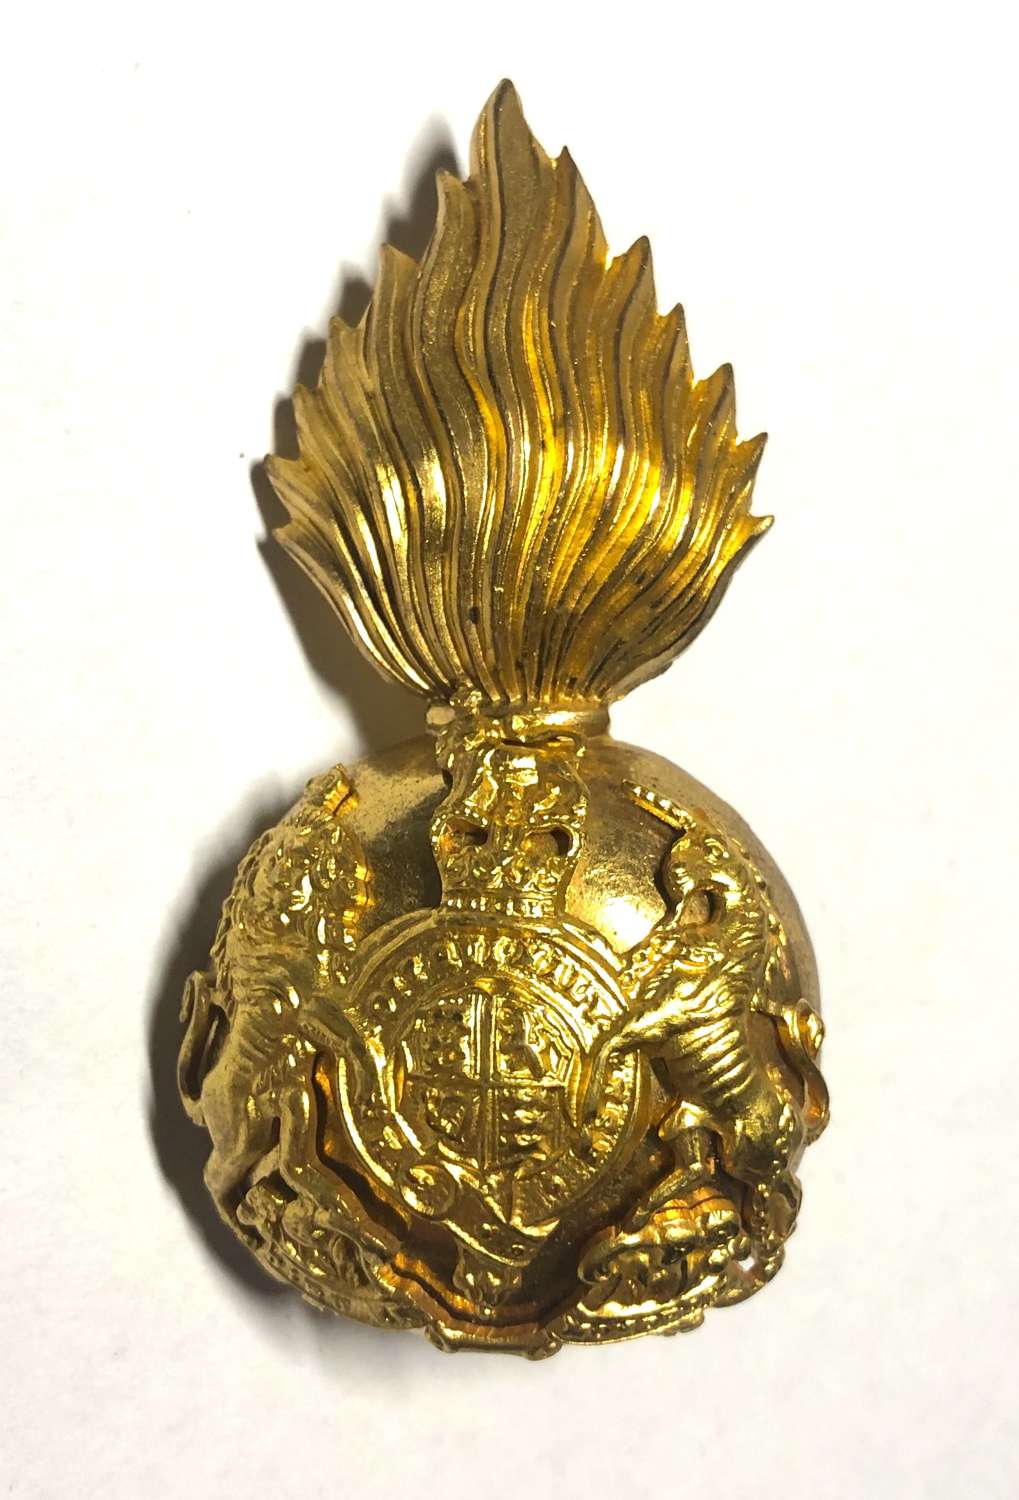 Royal Scots Fusiliers Officer’s cap/glengarry badge circa 1953-59